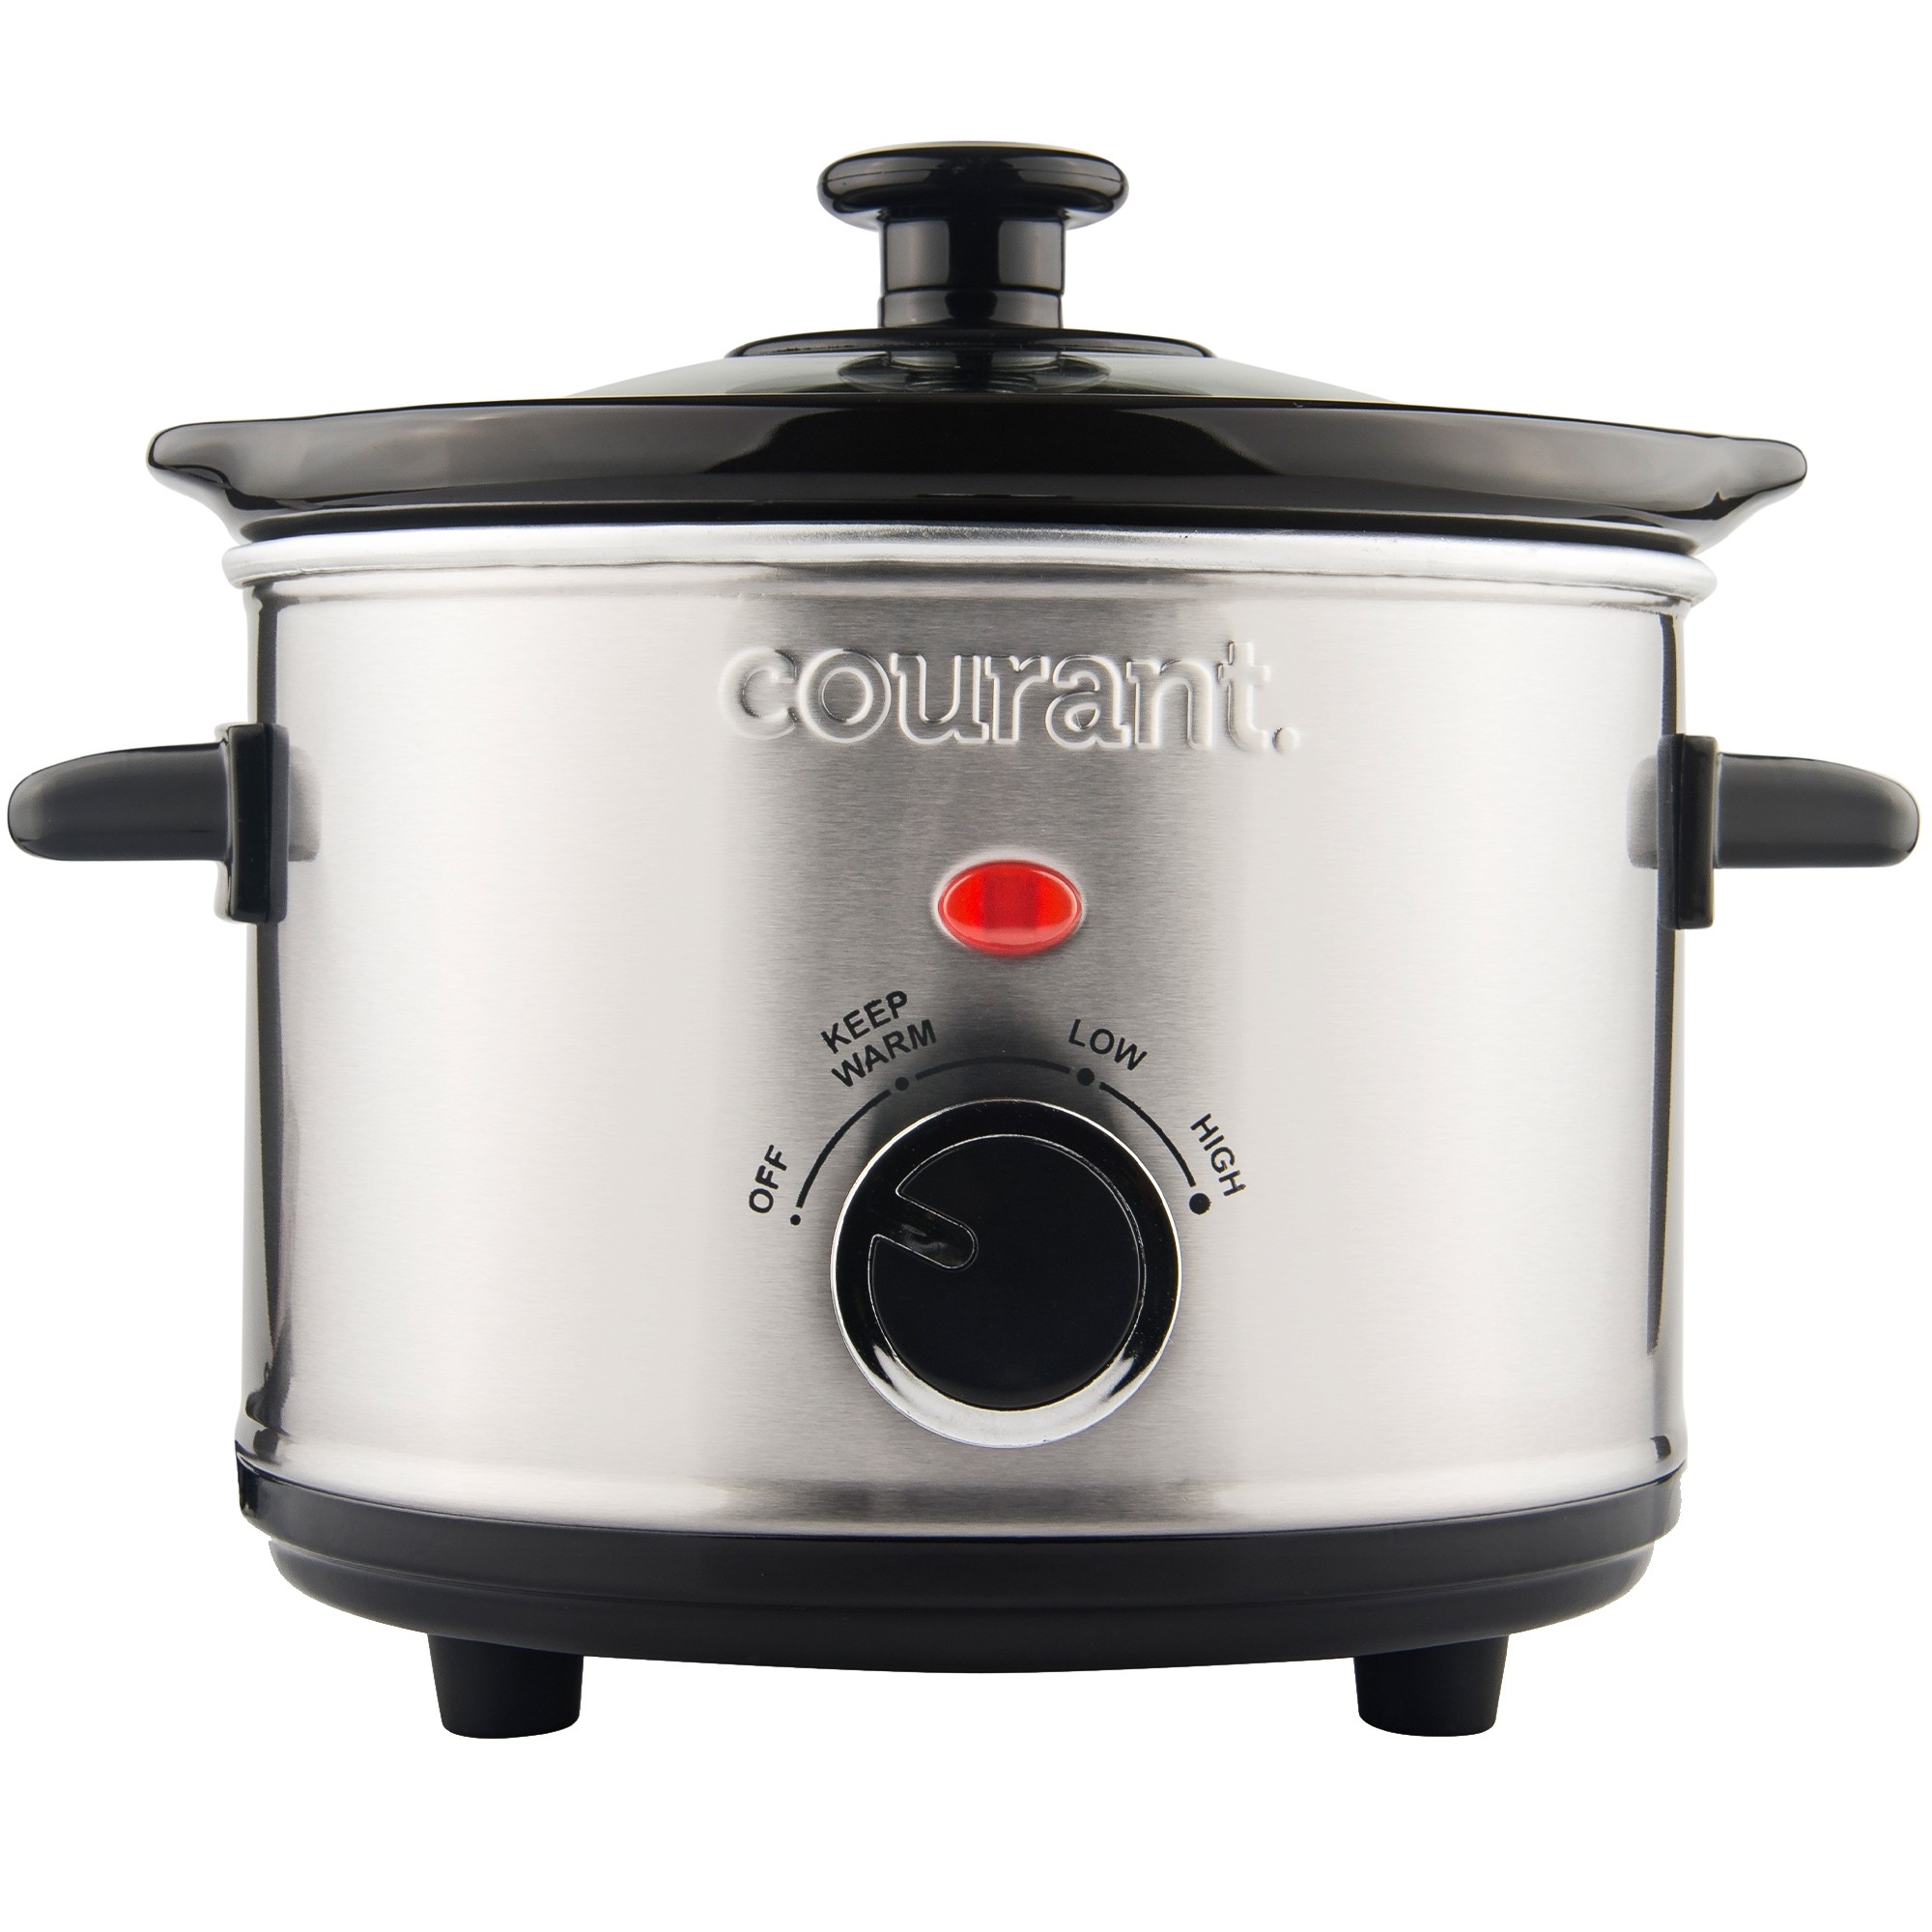 Courant 1.5 Qt. Brushed Stainless Steel Slow Cooker with Temperature  Settings and Tempered Glass Lid CSC-1524ST - The Home Depot